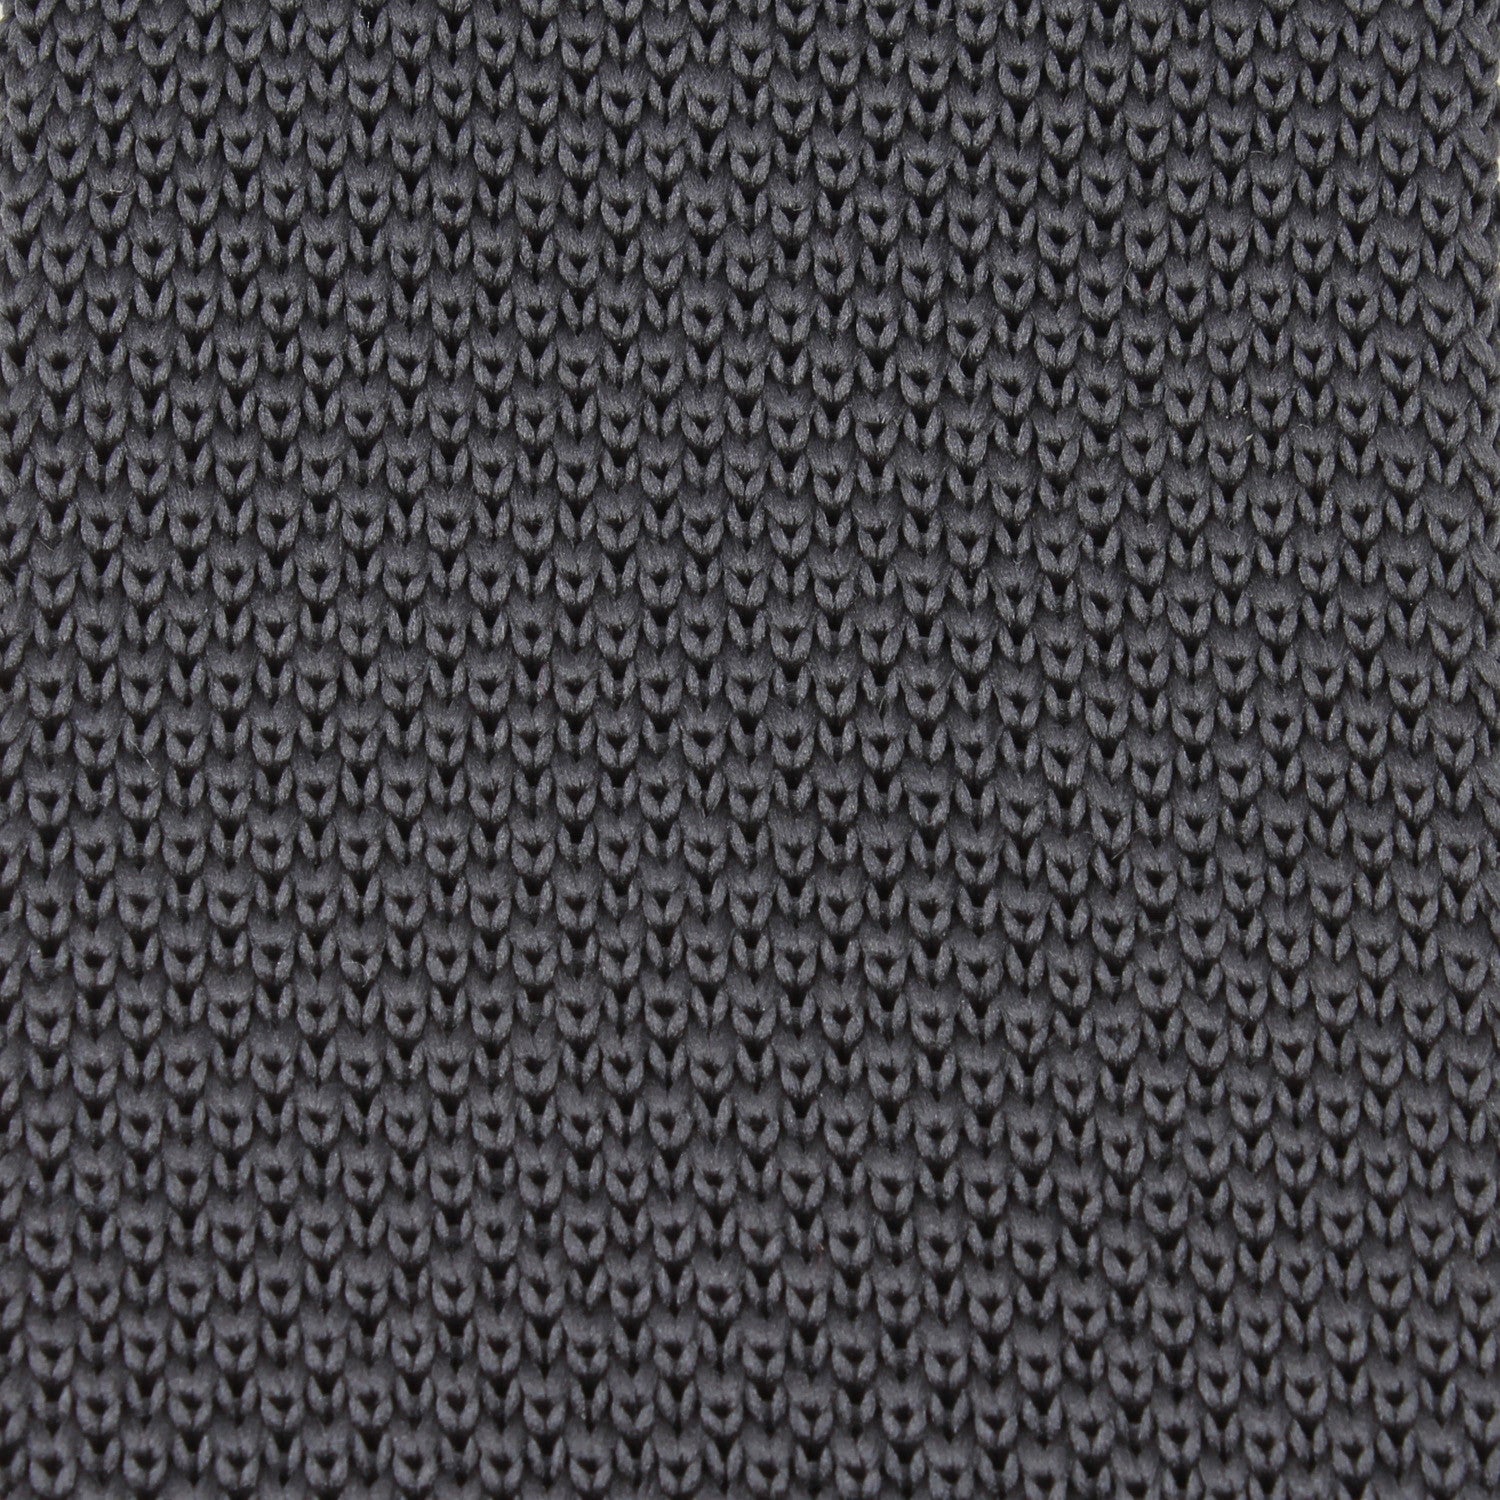 Charcoal Grey Knitted Tie Detail View